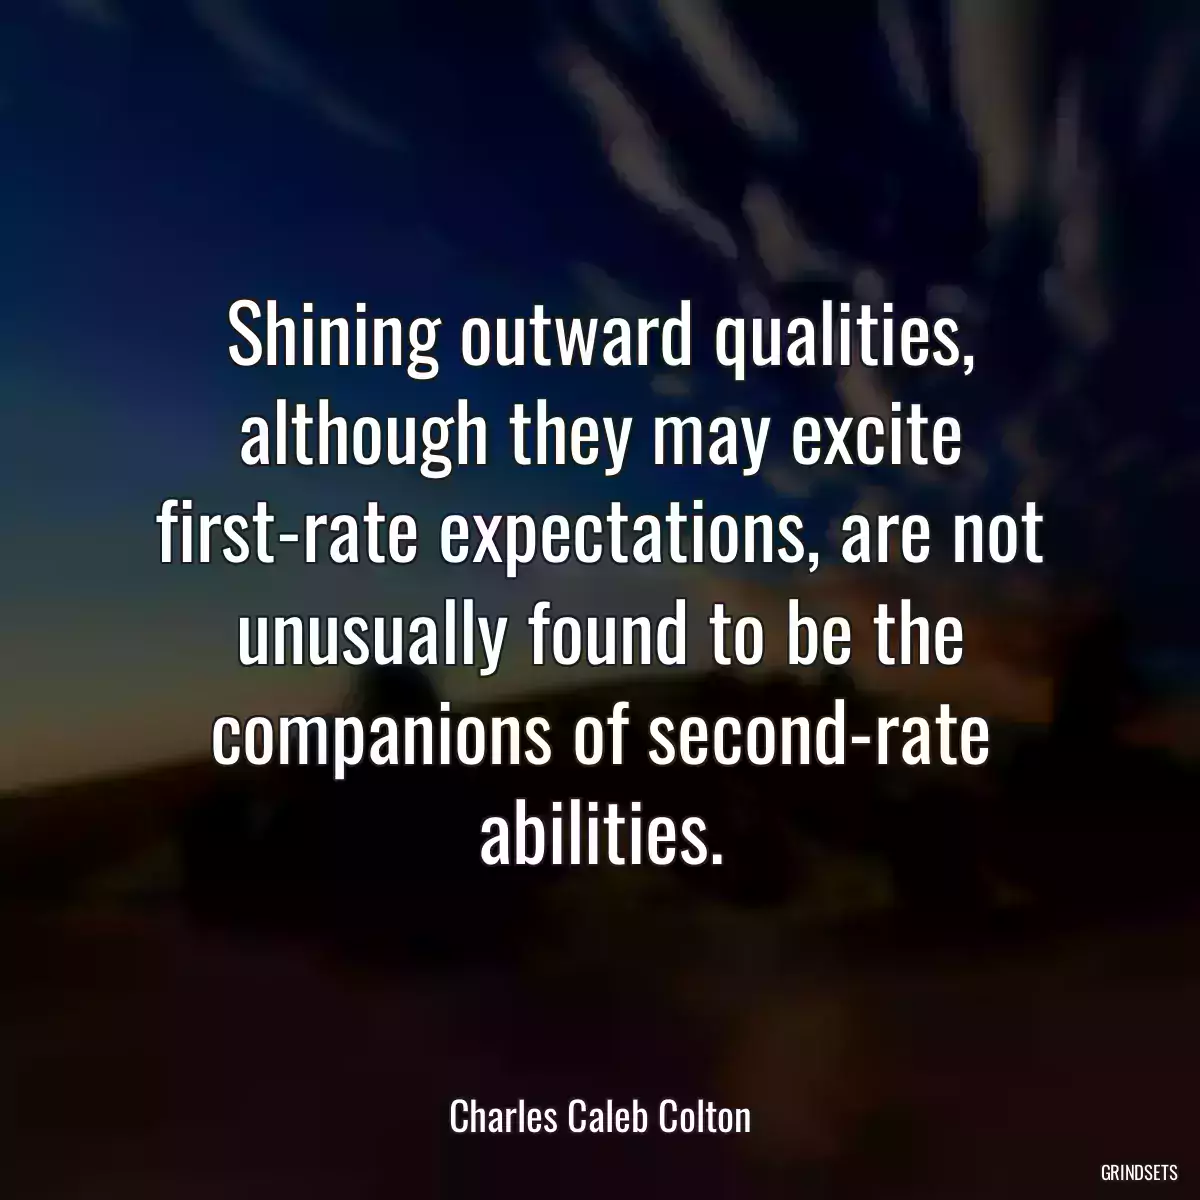 Shining outward qualities, although they may excite first-rate expectations, are not unusually found to be the companions of second-rate abilities.